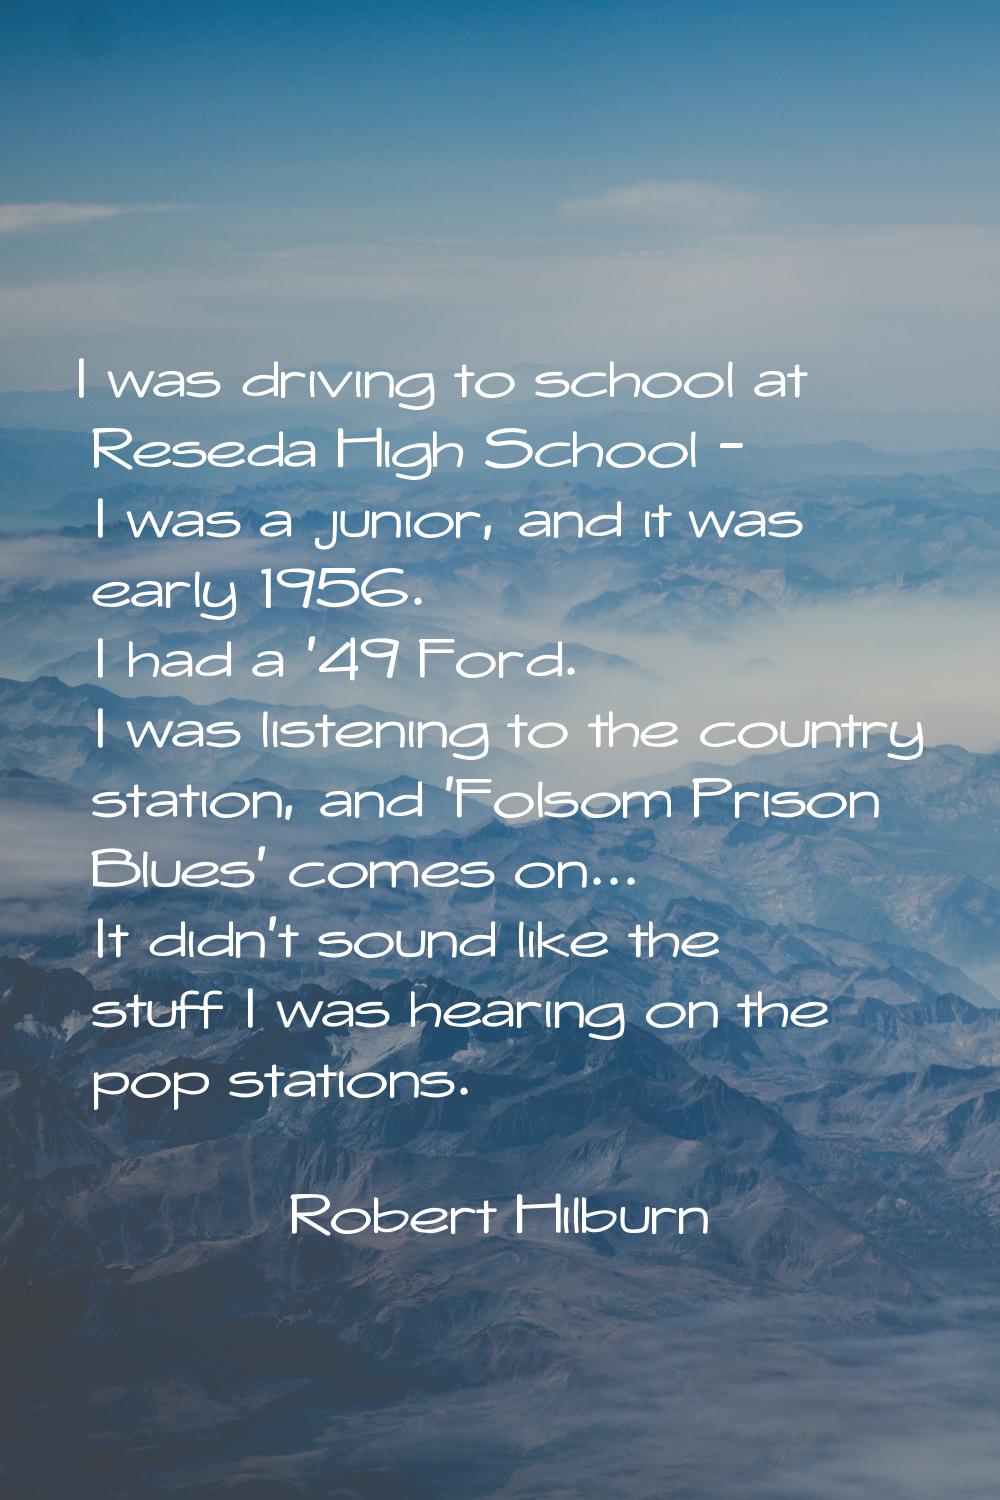 I was driving to school at Reseda High School - I was a junior, and it was early 1956. I had a '49 